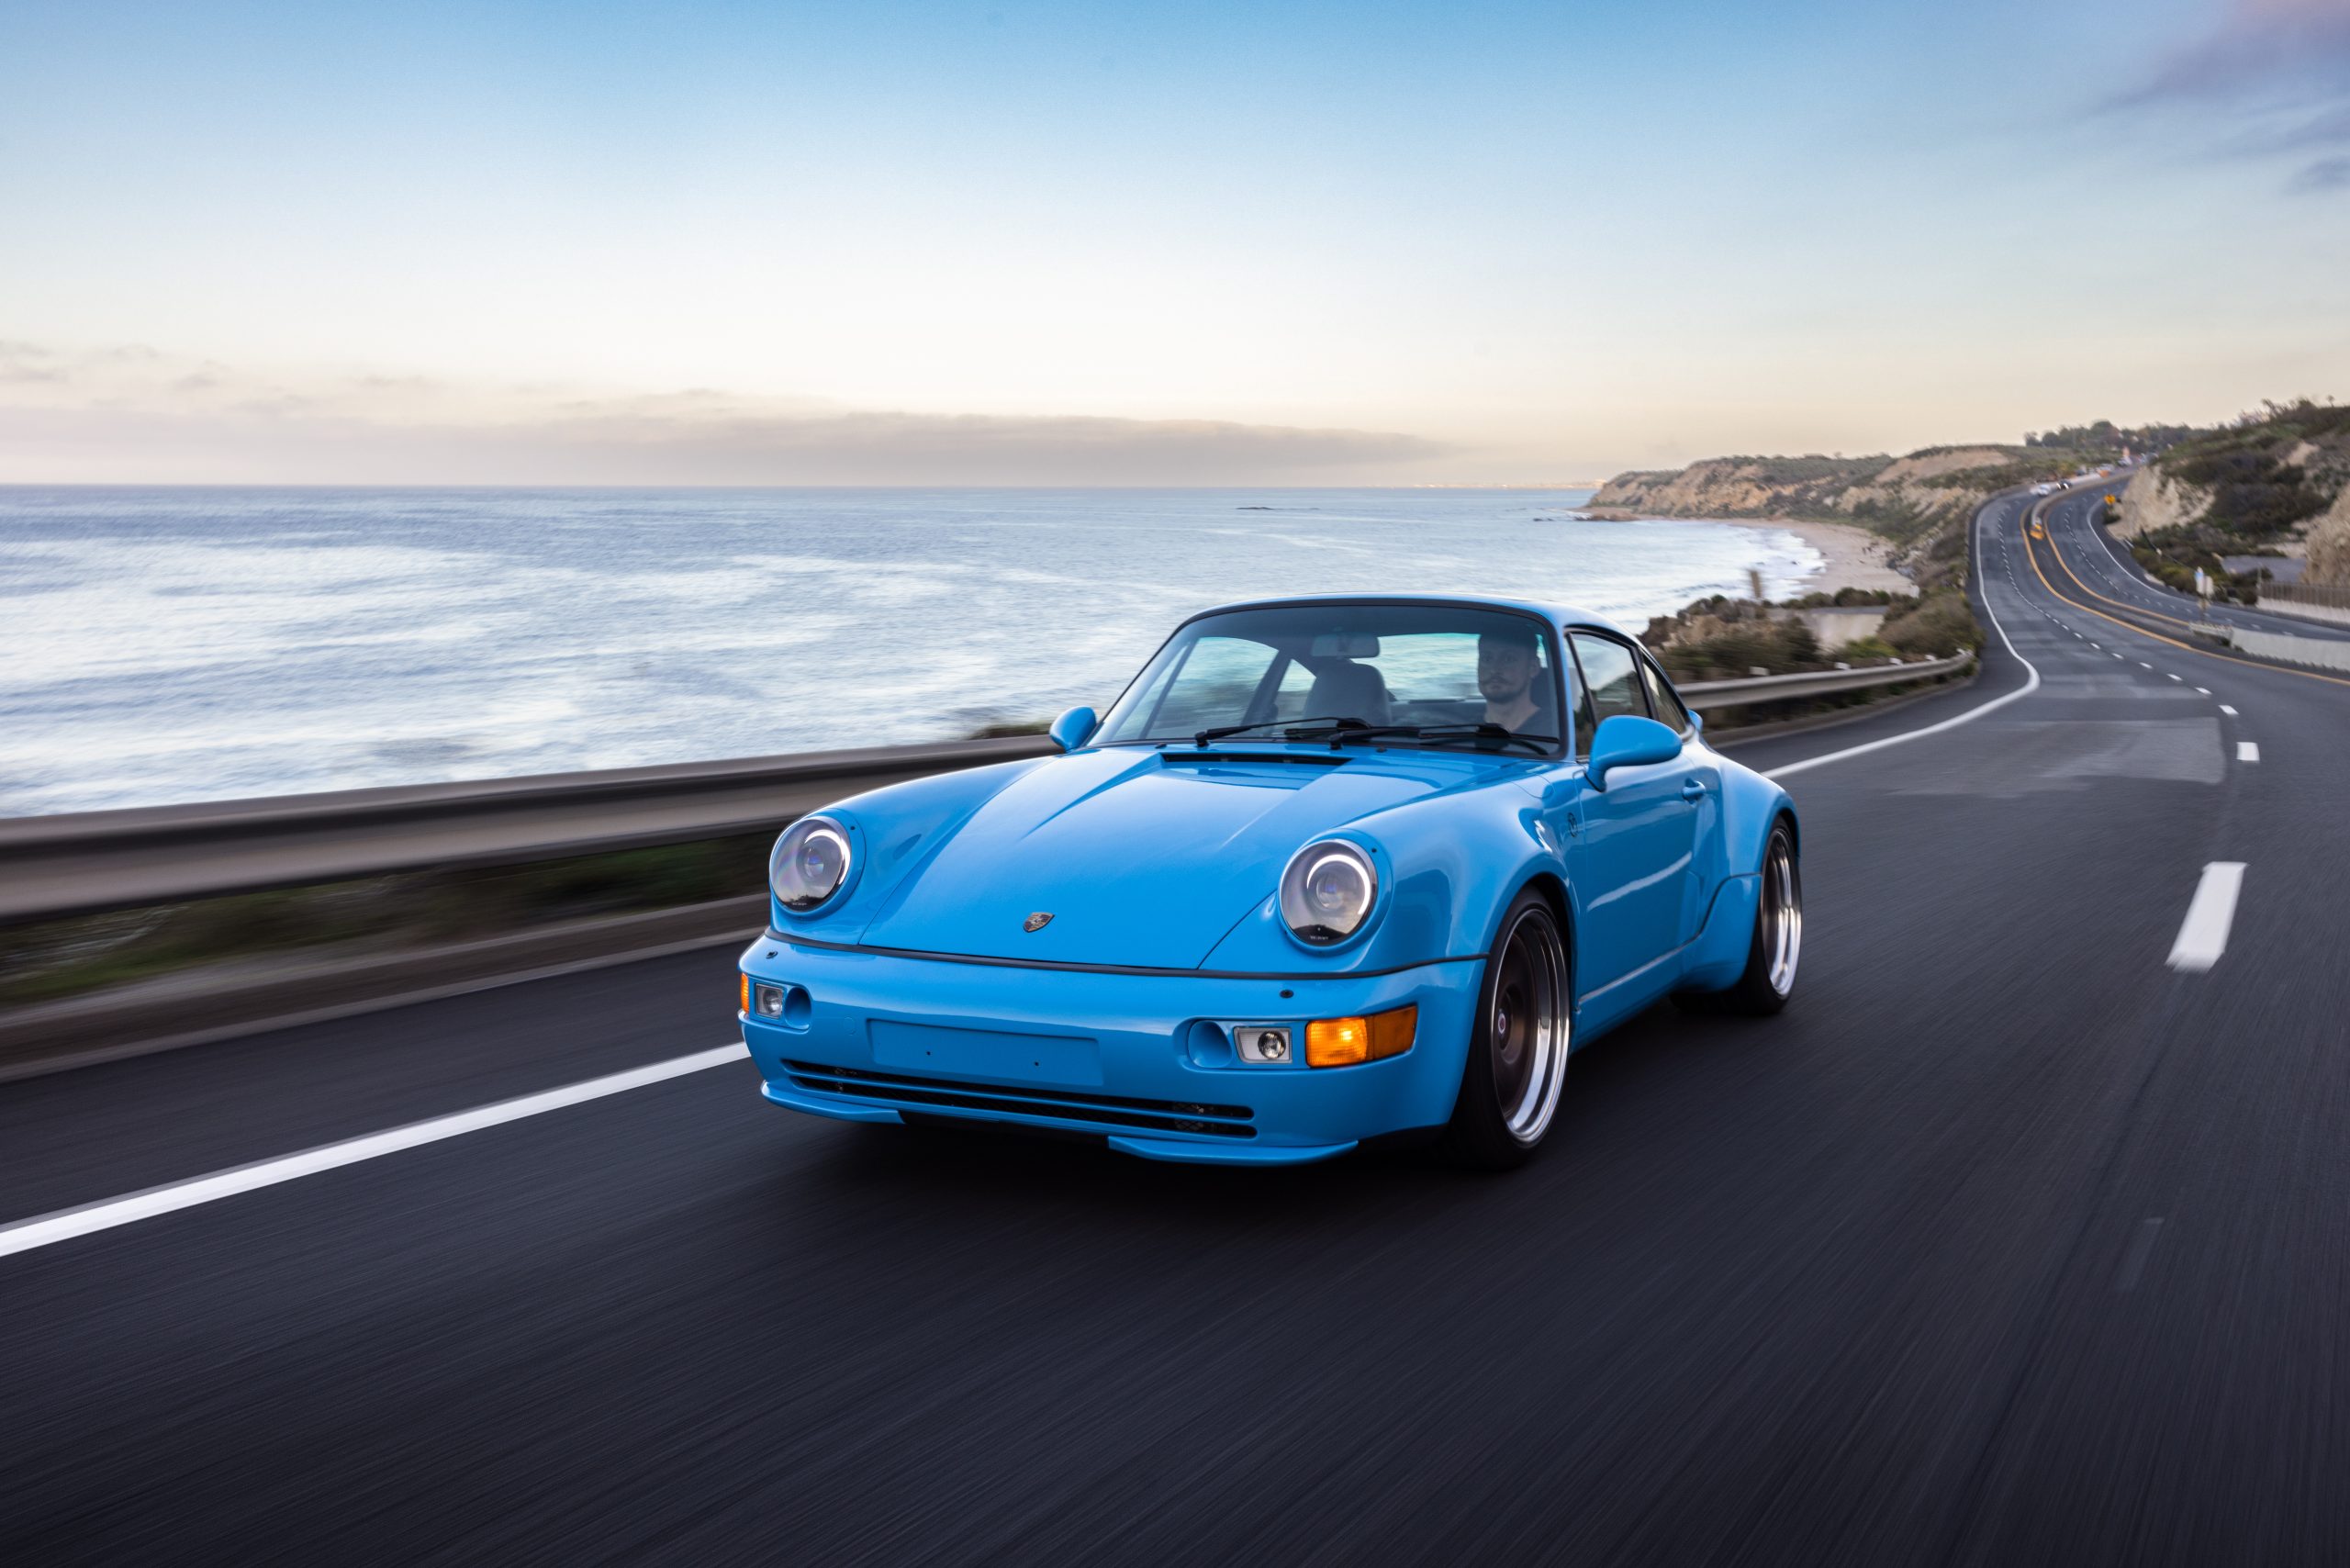 EV-swapped Porsche 911s to amp up the atmosphere at California's Car Week